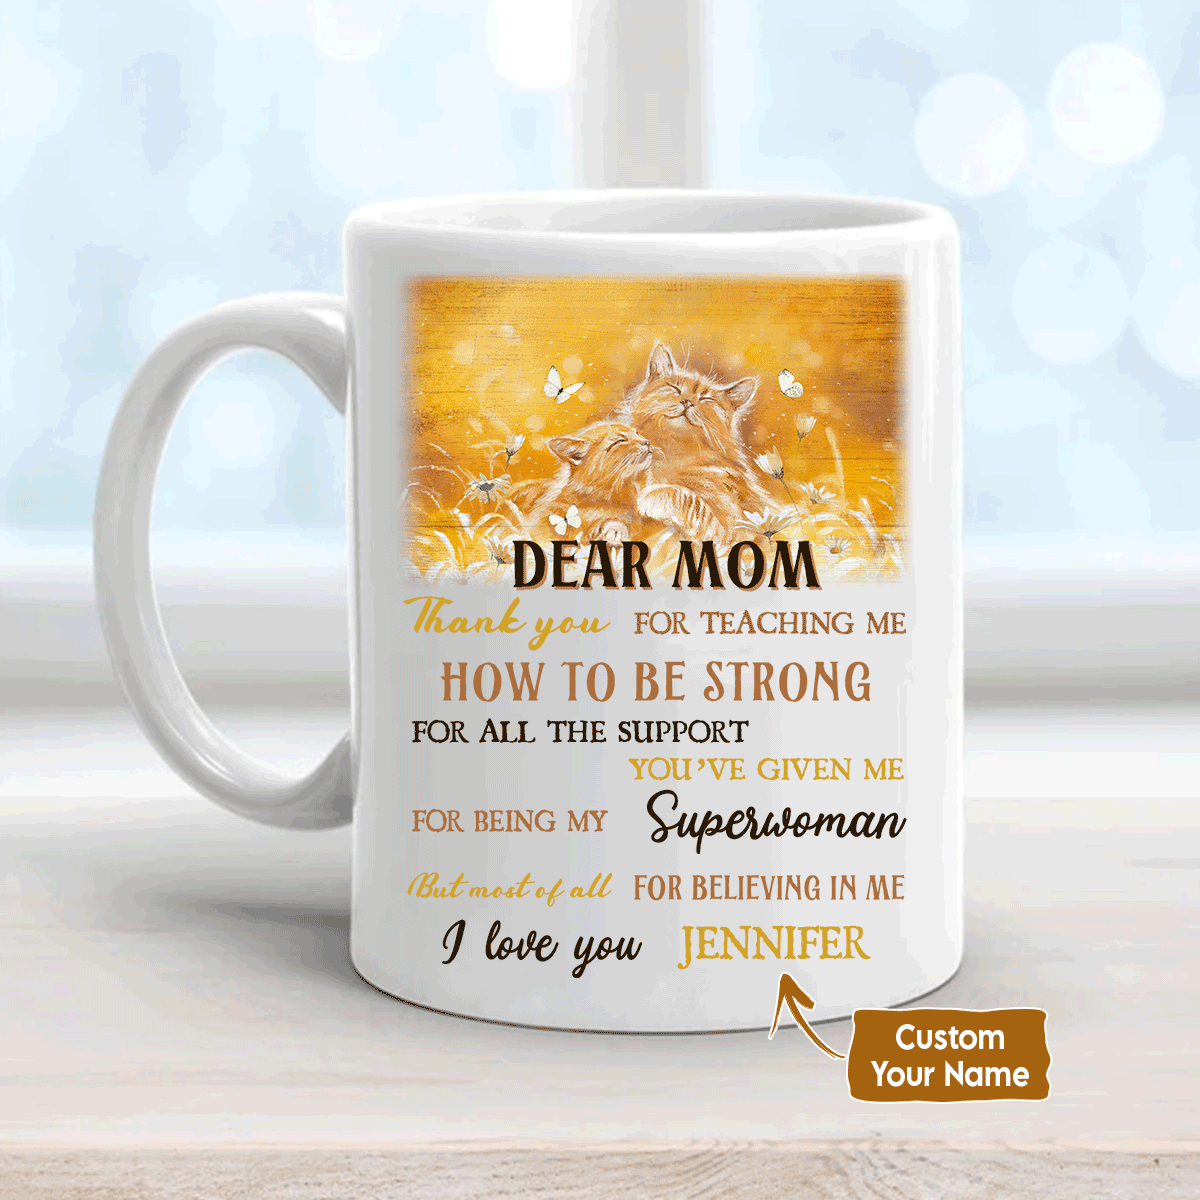 Gift For Mom Personalized Mug-Daughter to mom, Cute cat, Daisy Mug, Thank you for teaching me Mug -Custom Gift For Mother's Day, Presents for Mom